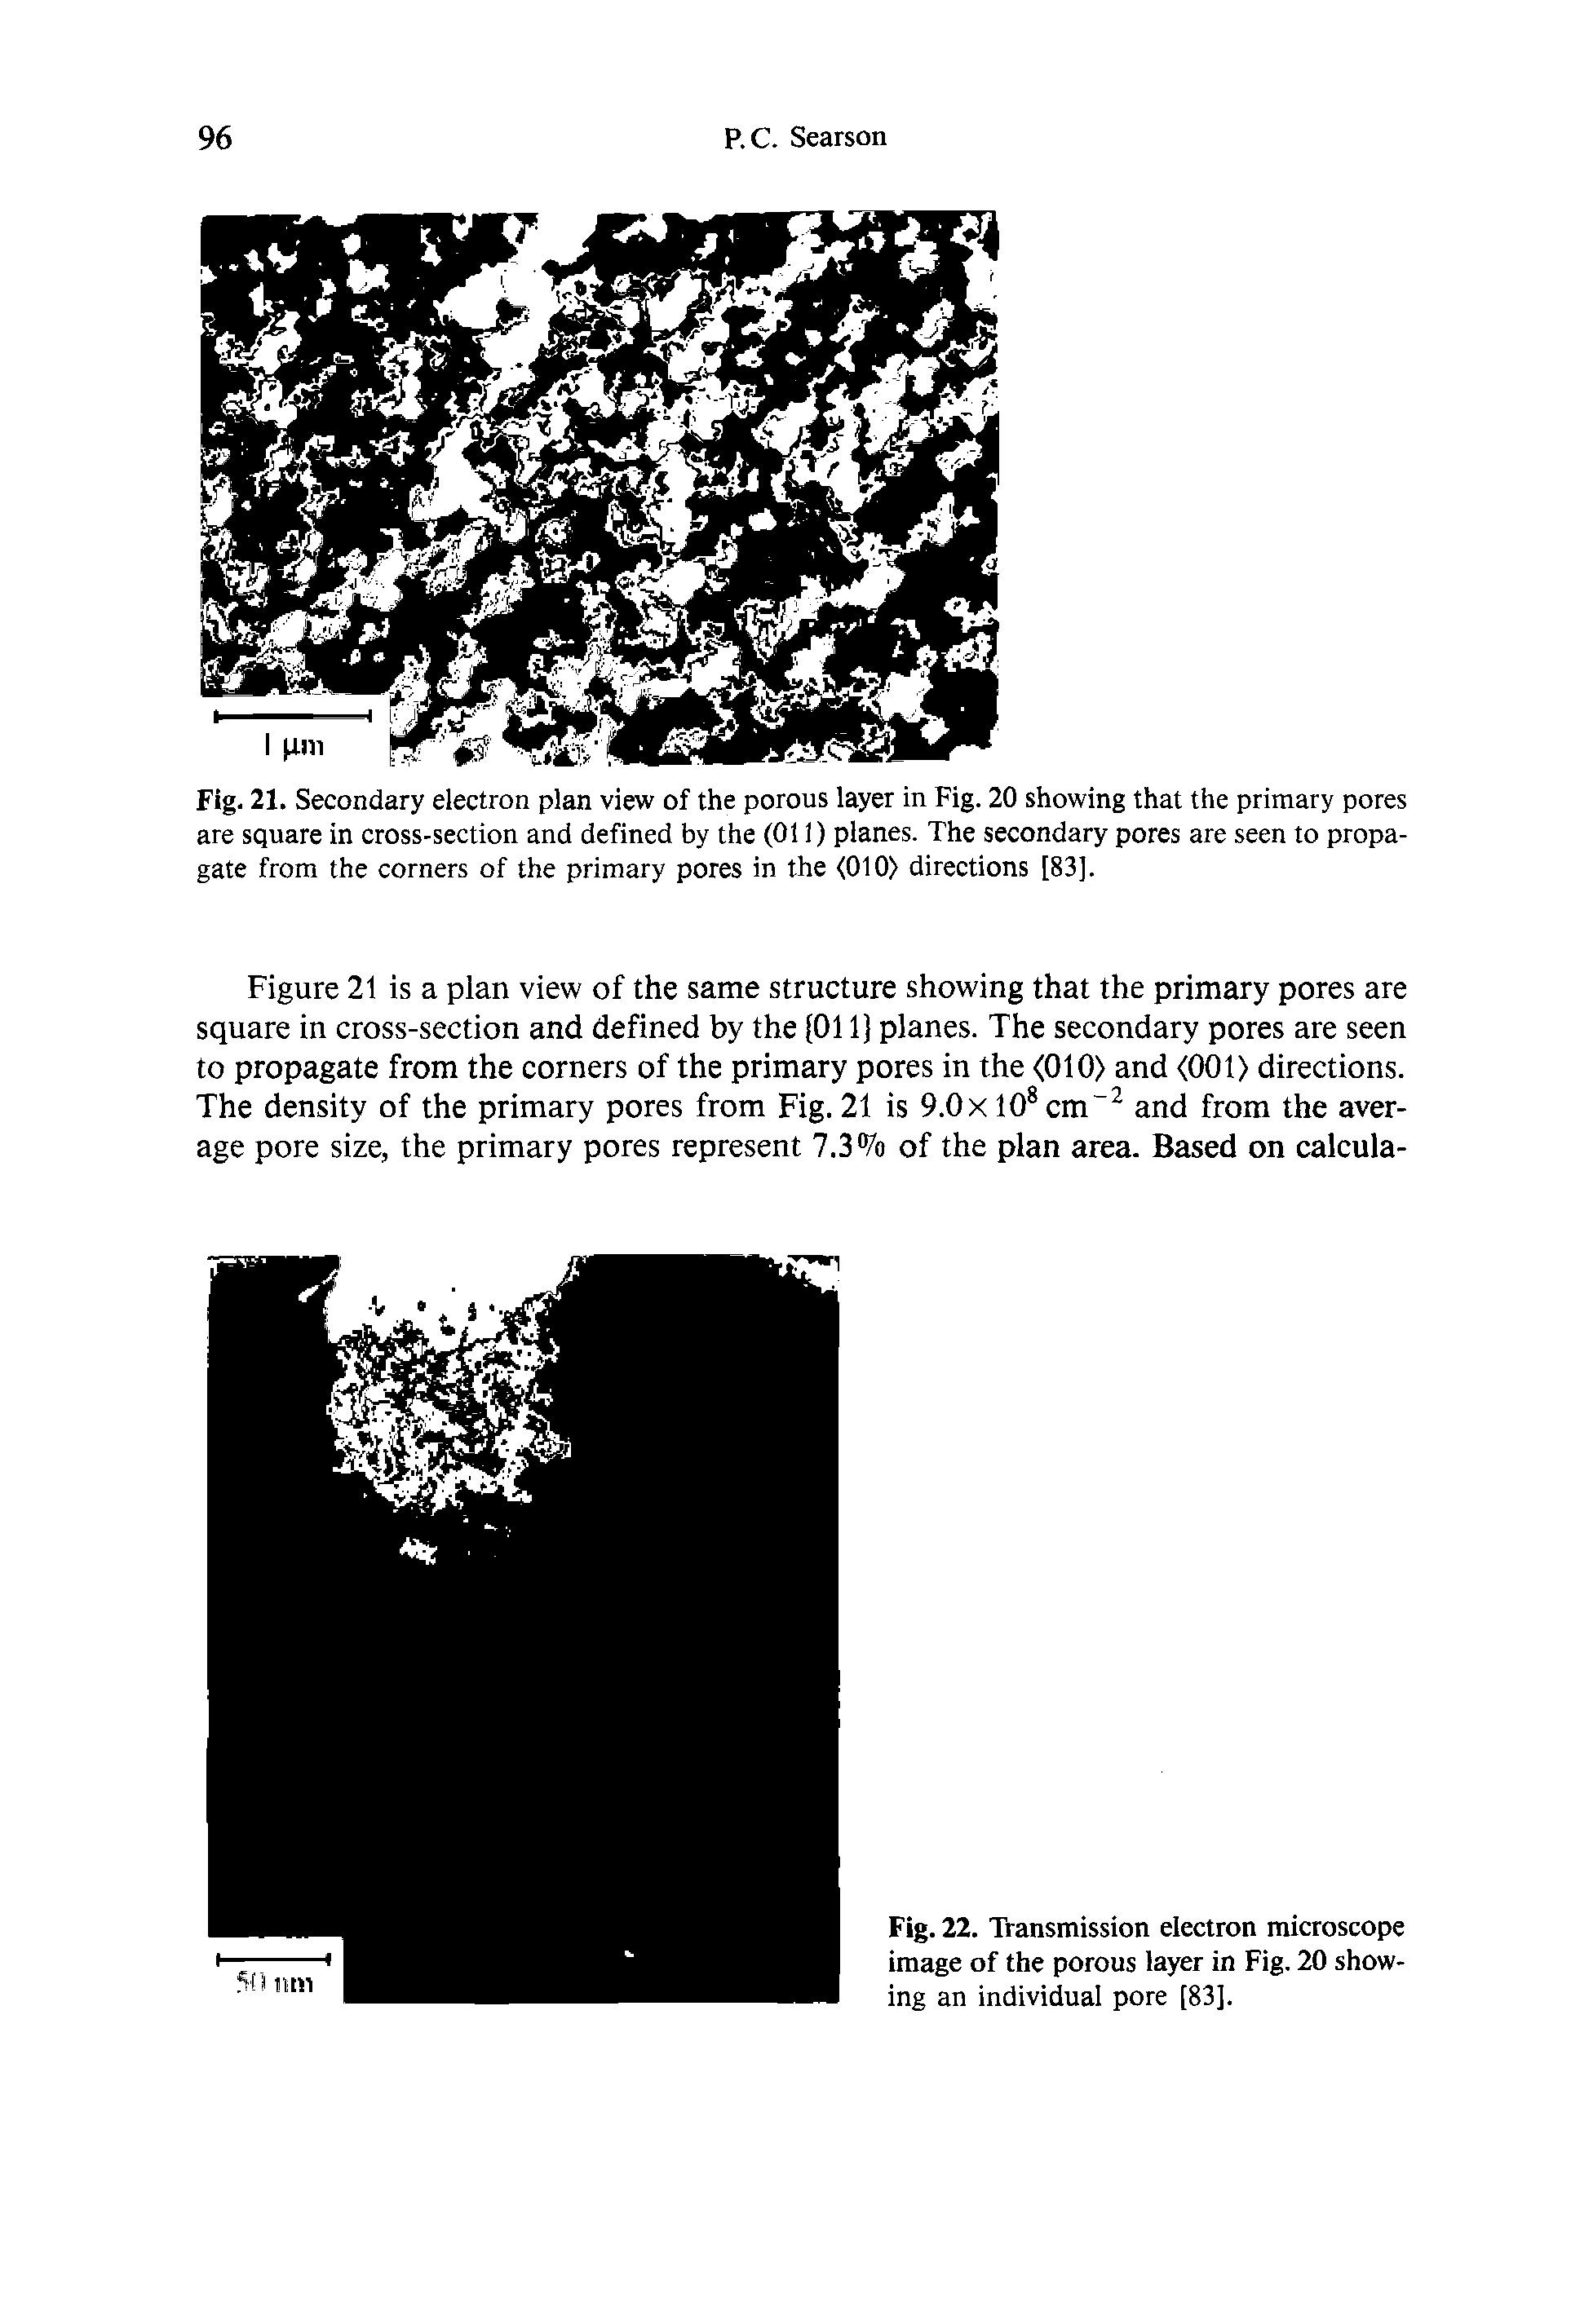 Fig. 22. Transmission electron microscope image of the porous layer in Fig. 20 showing an individual pore [83].